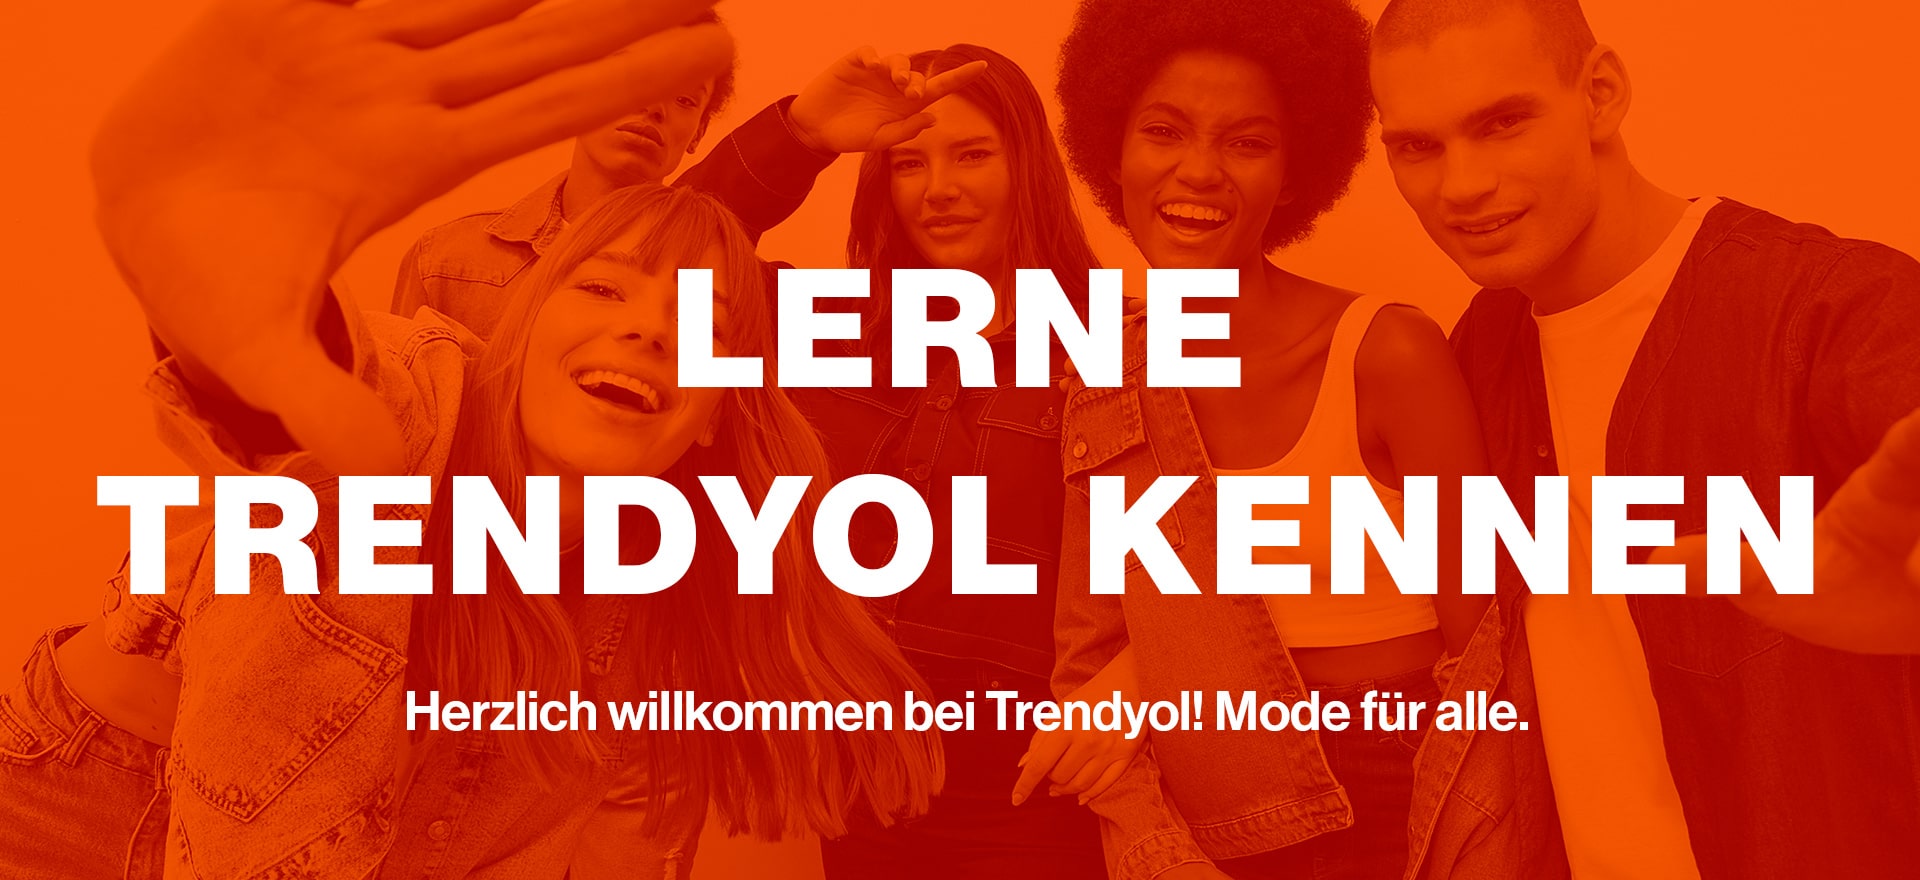 about us trendyol